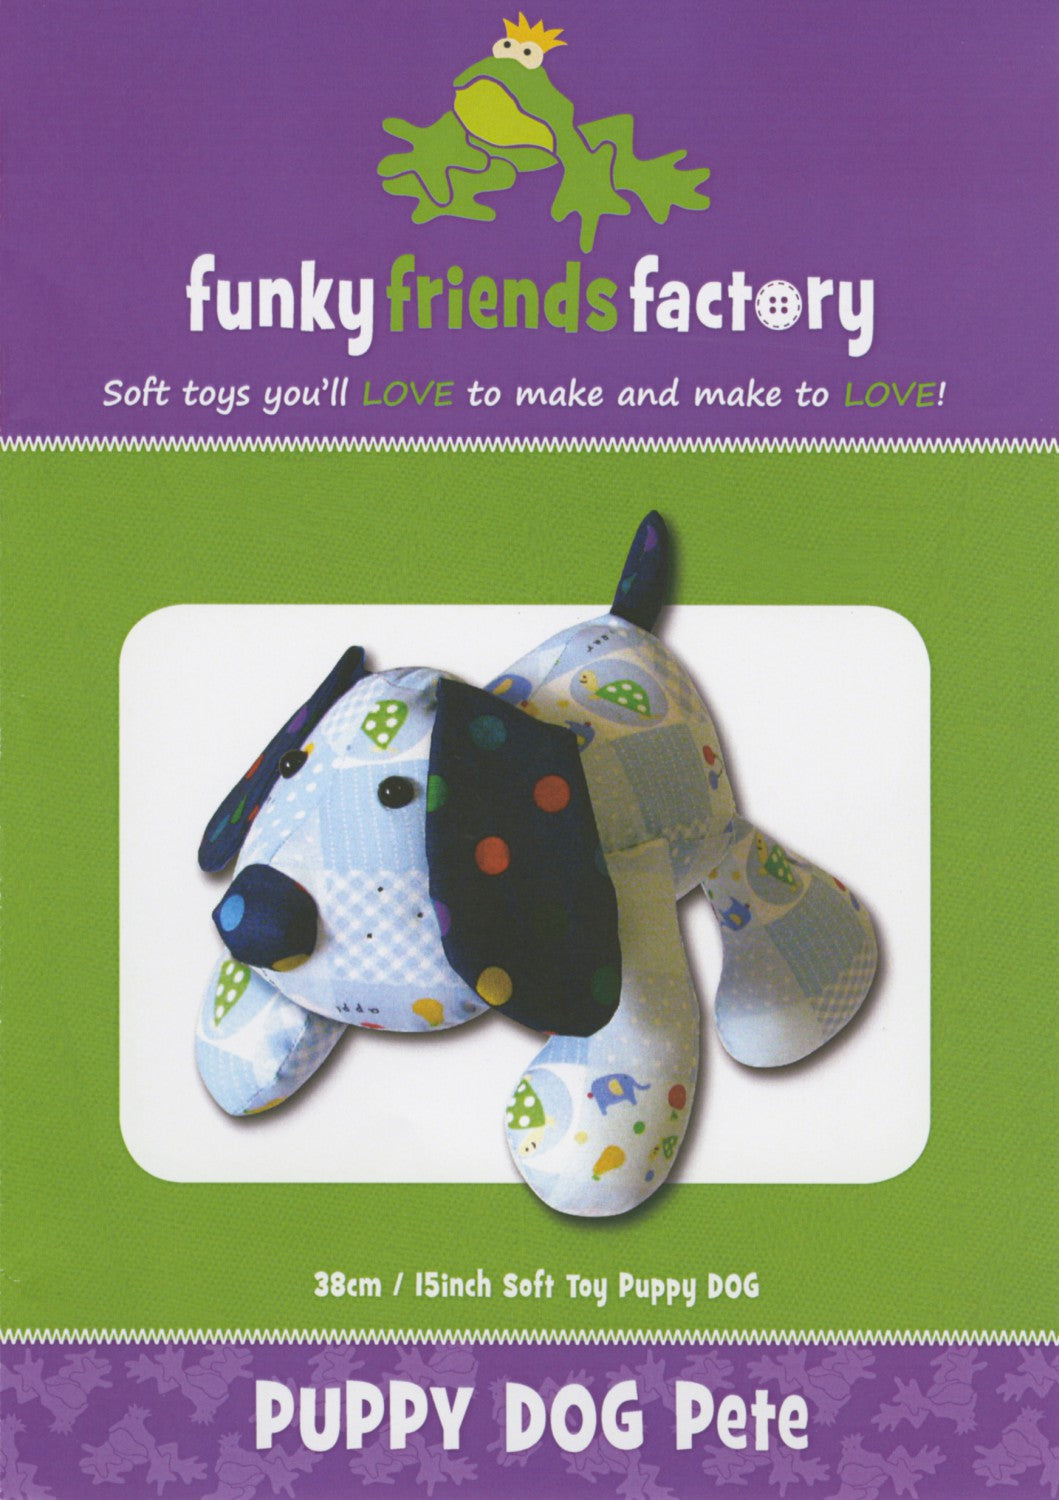 Puppy Dog Pete Soft Toy Sewing Pattern - FF4477 - Funky Friends Factory